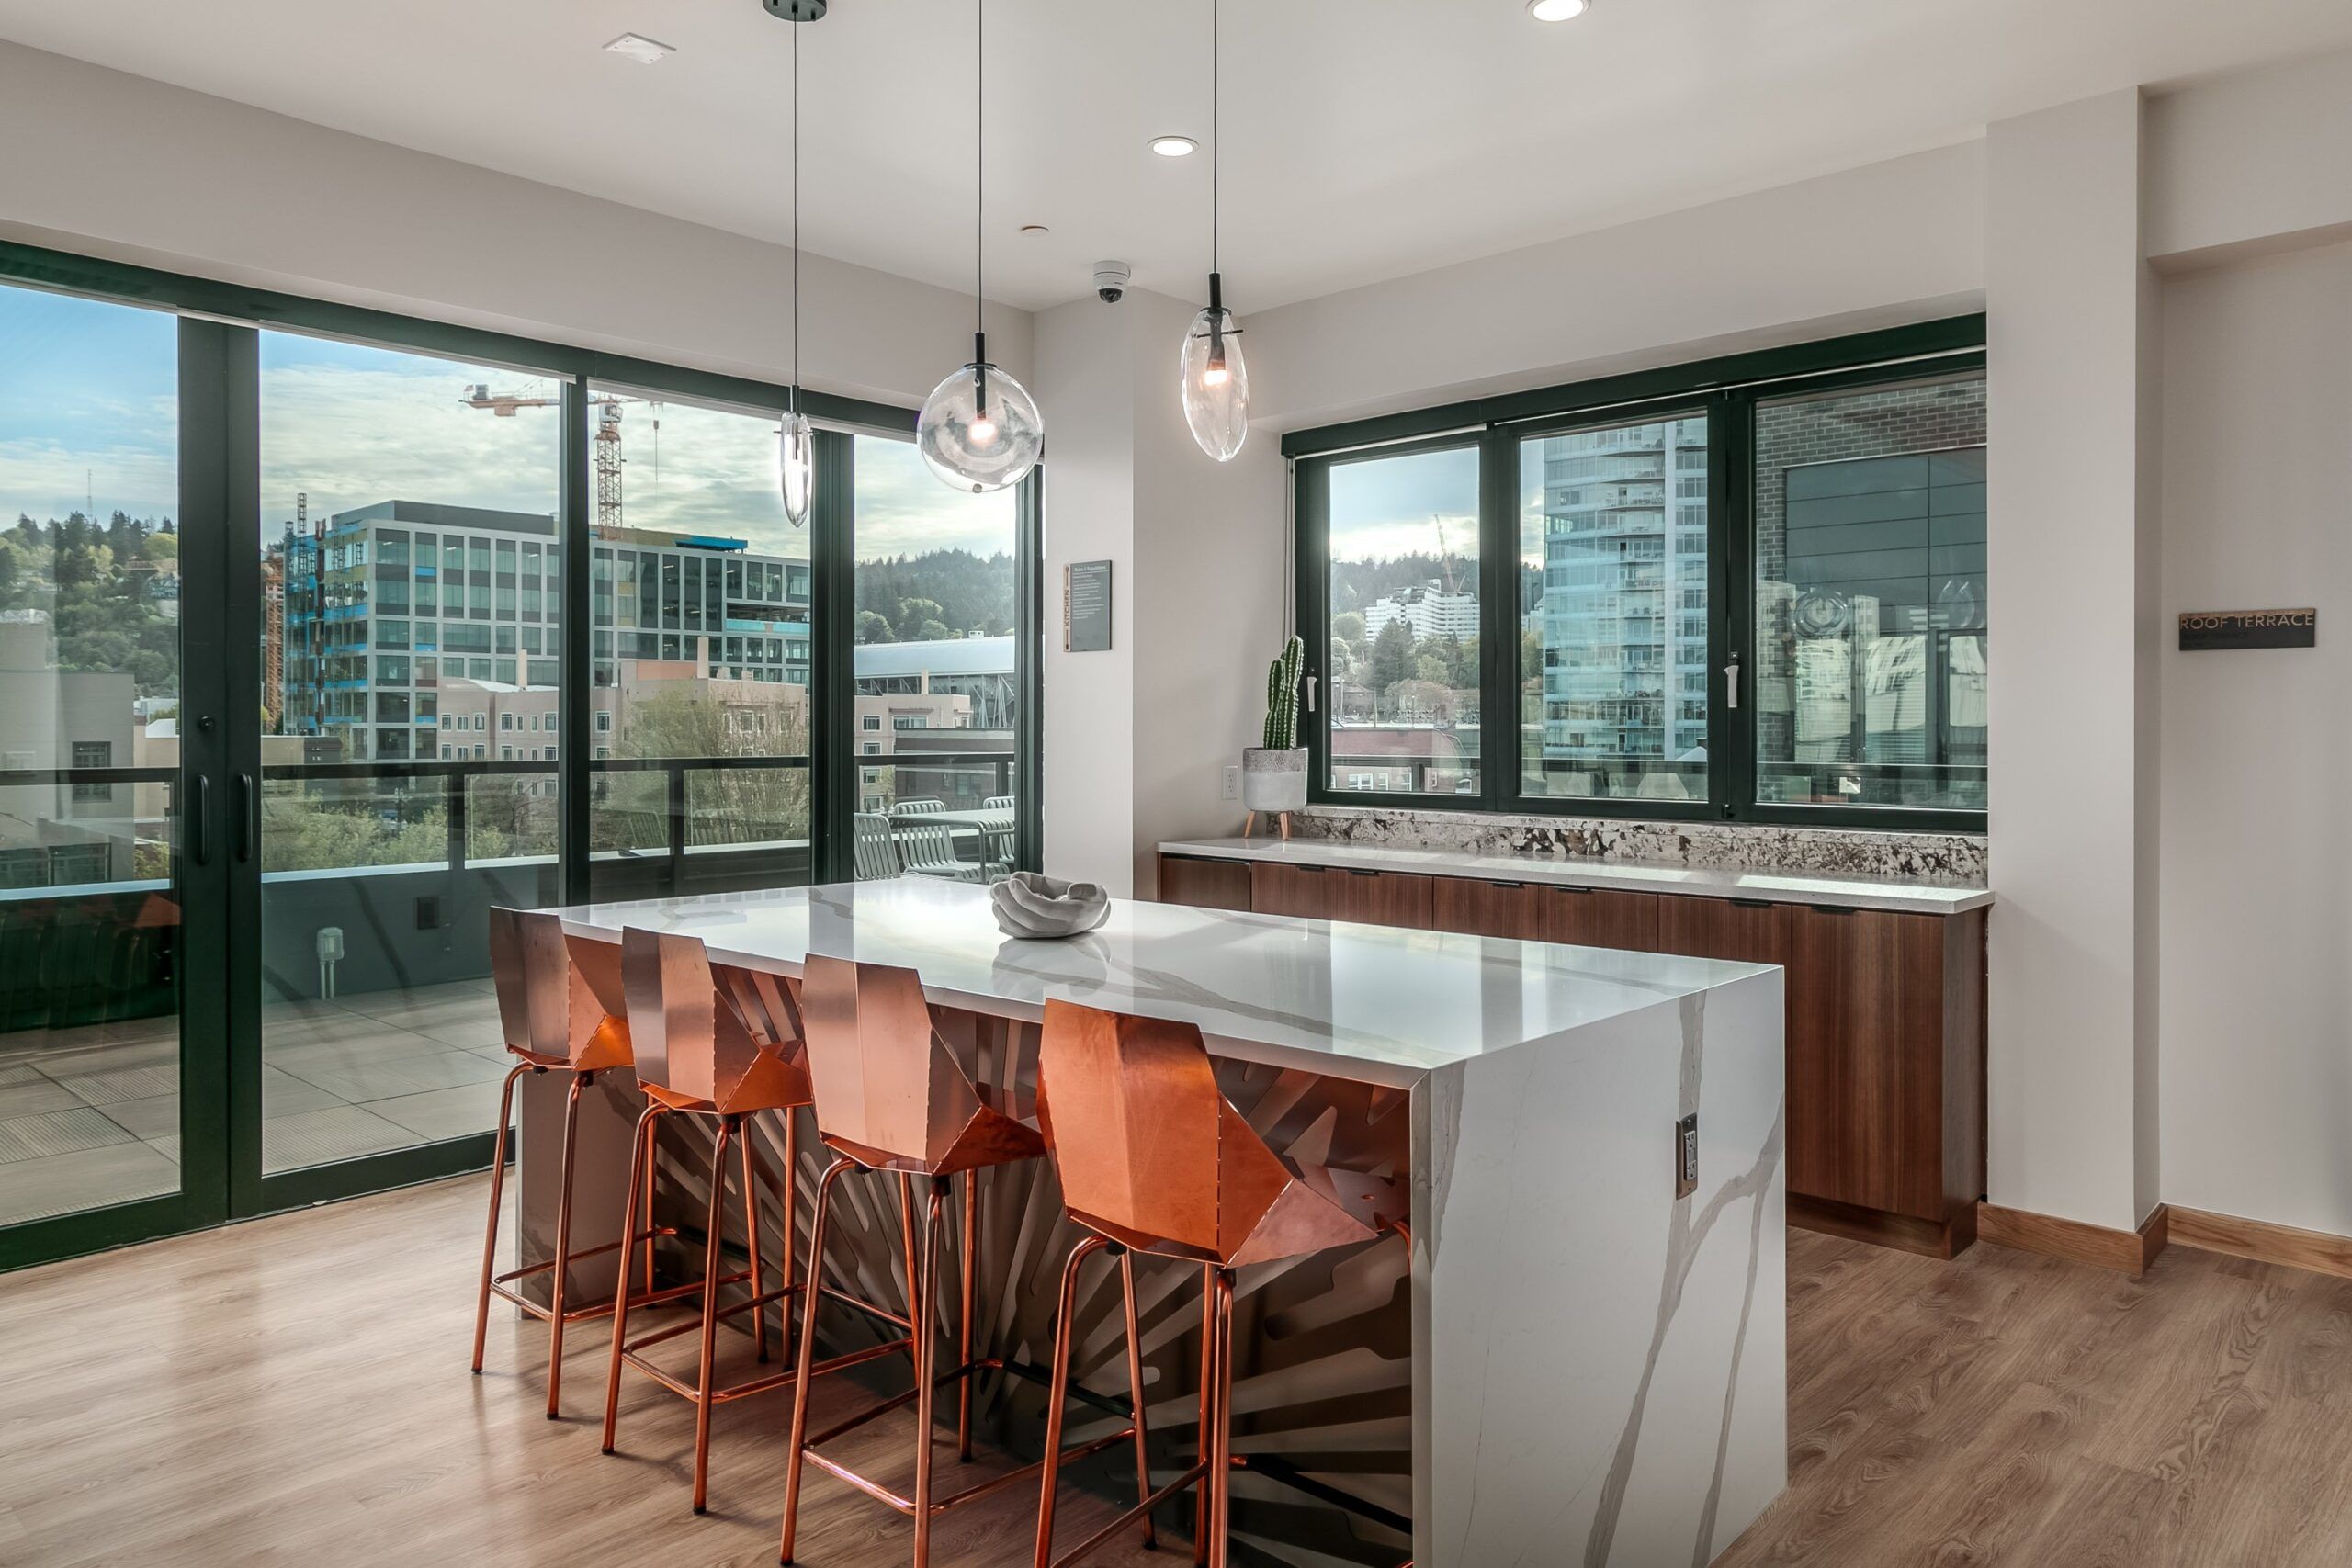 Alta Peak apartments amenity lounge with waterfall kitchen island and pendant lighting